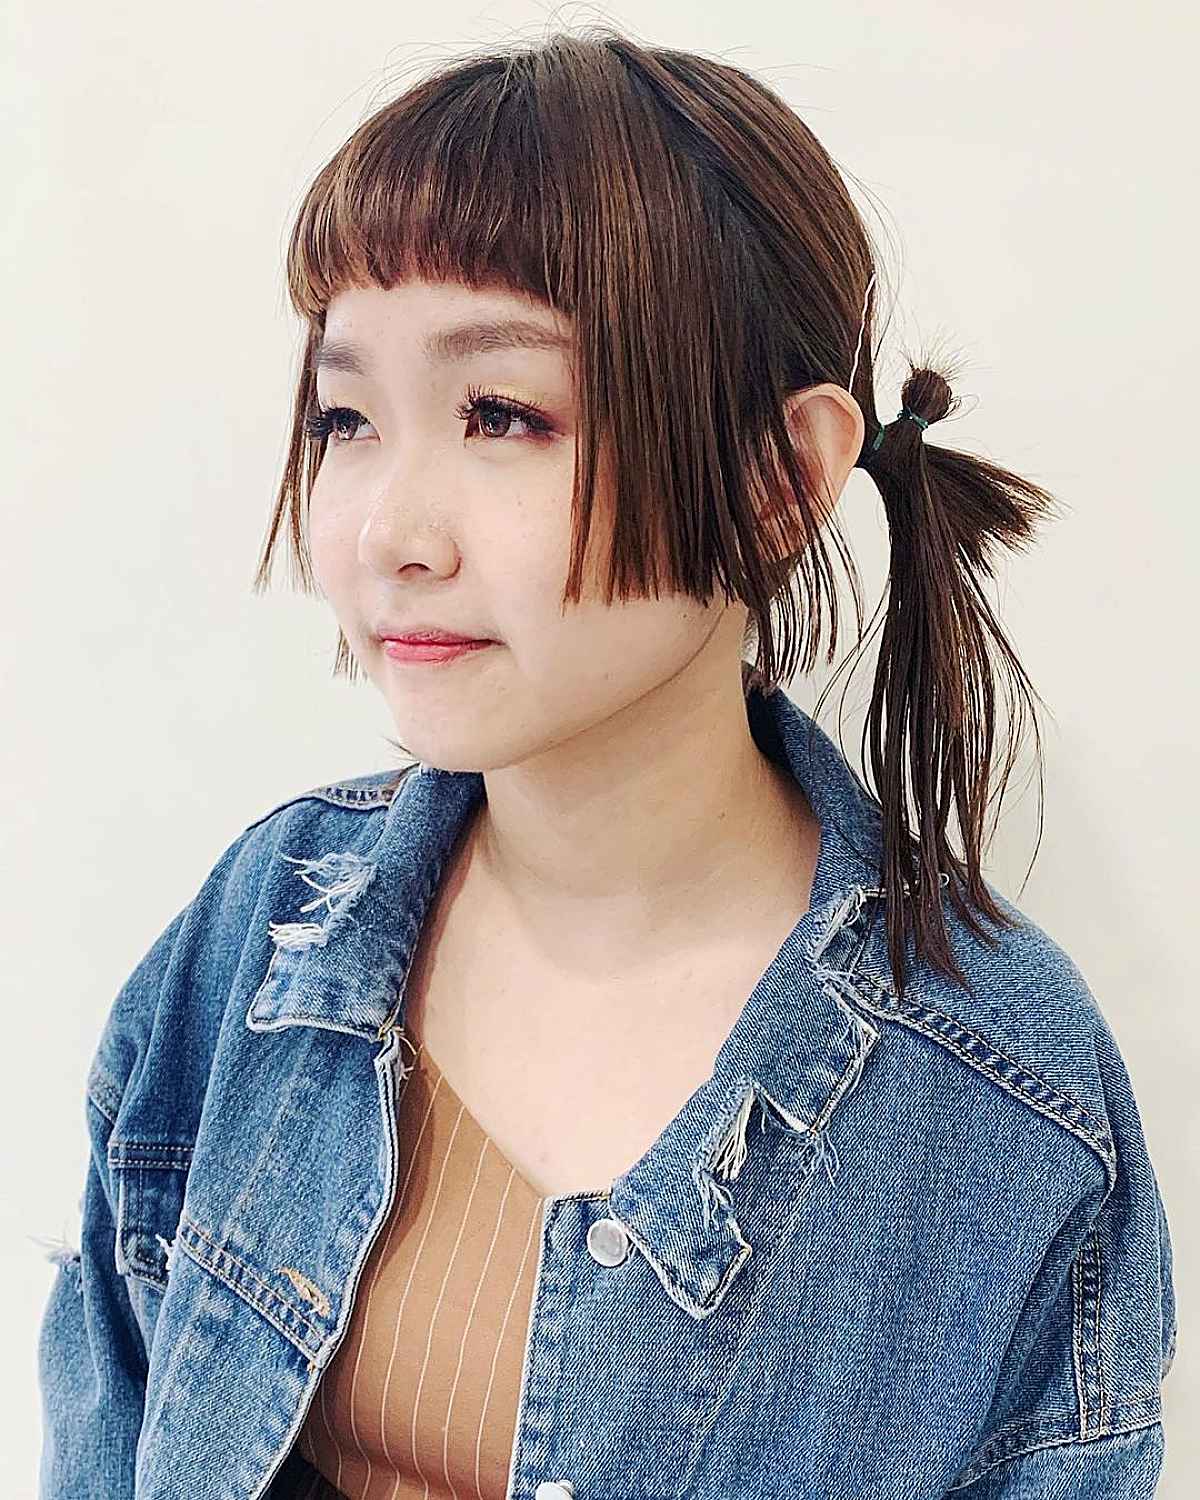 28 Hottest Ways to Get The Hime Haircut Trend